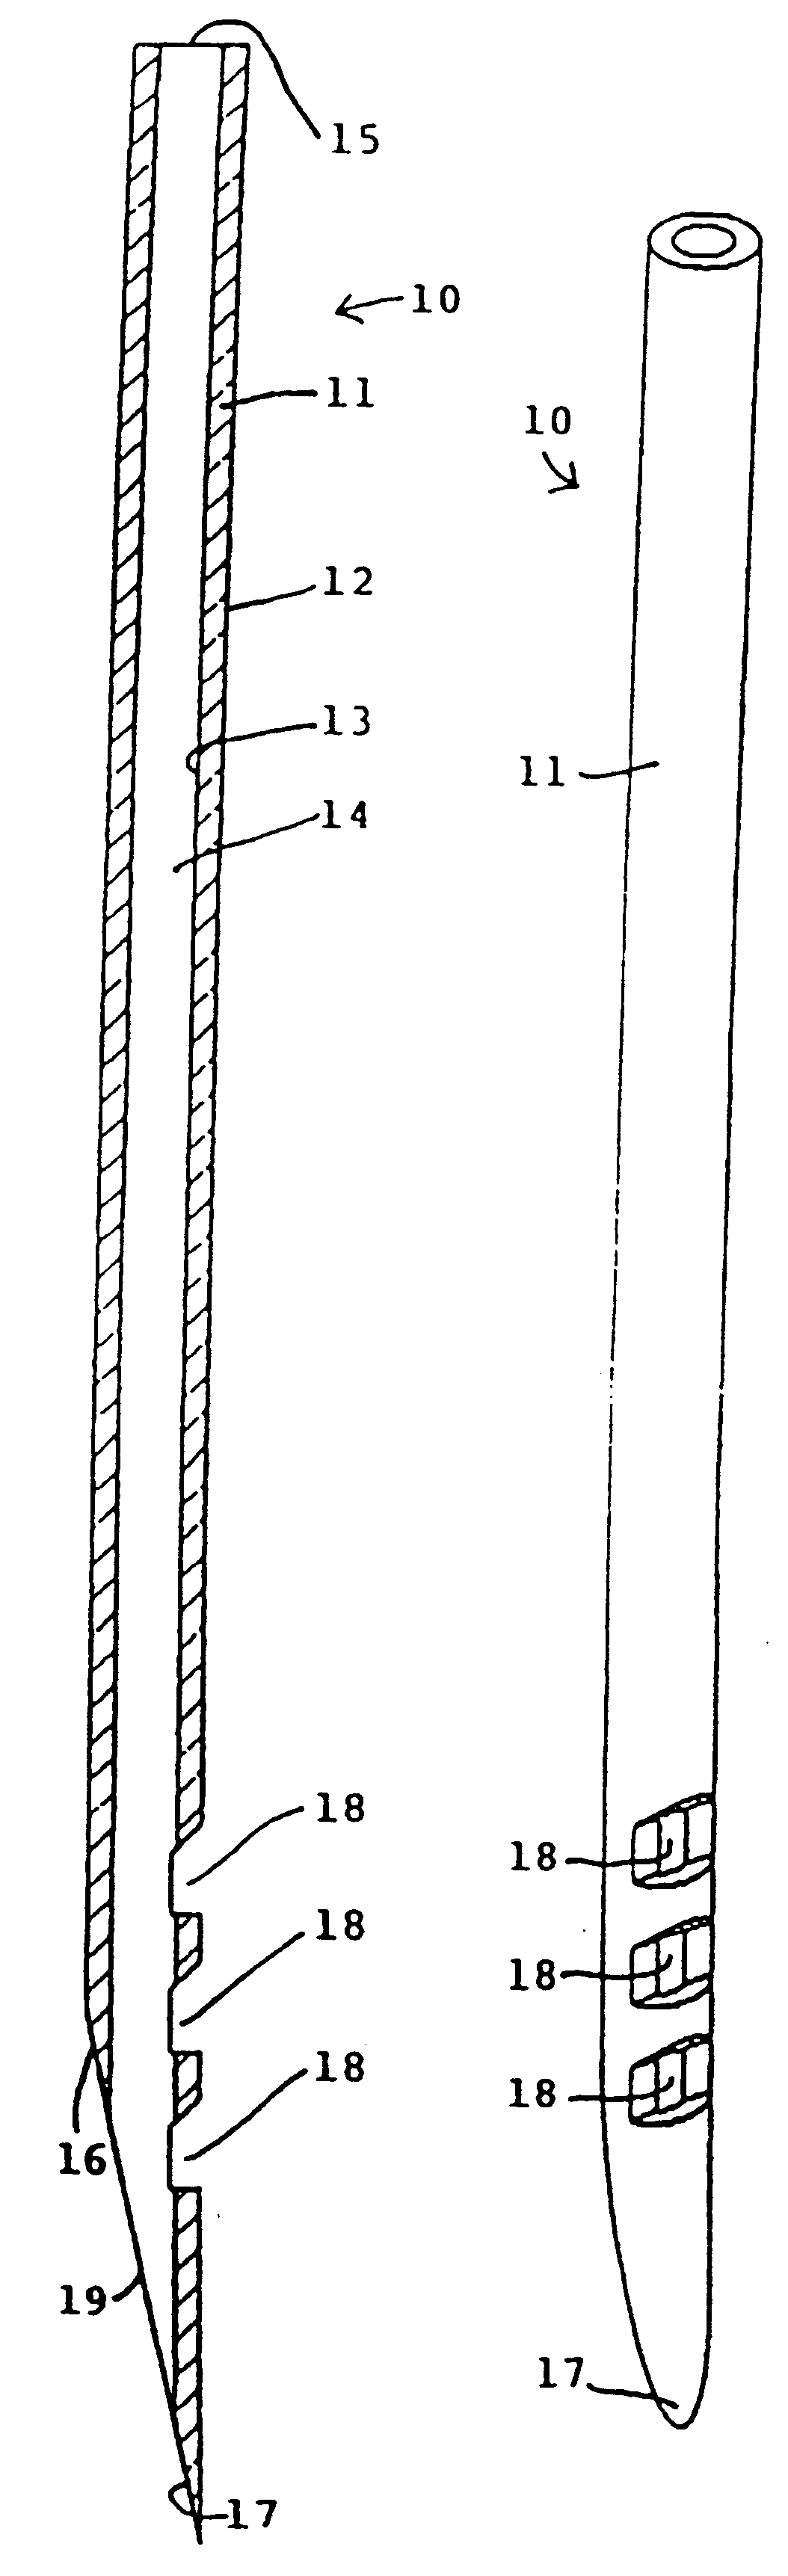 Needle and method for delivery of fluids